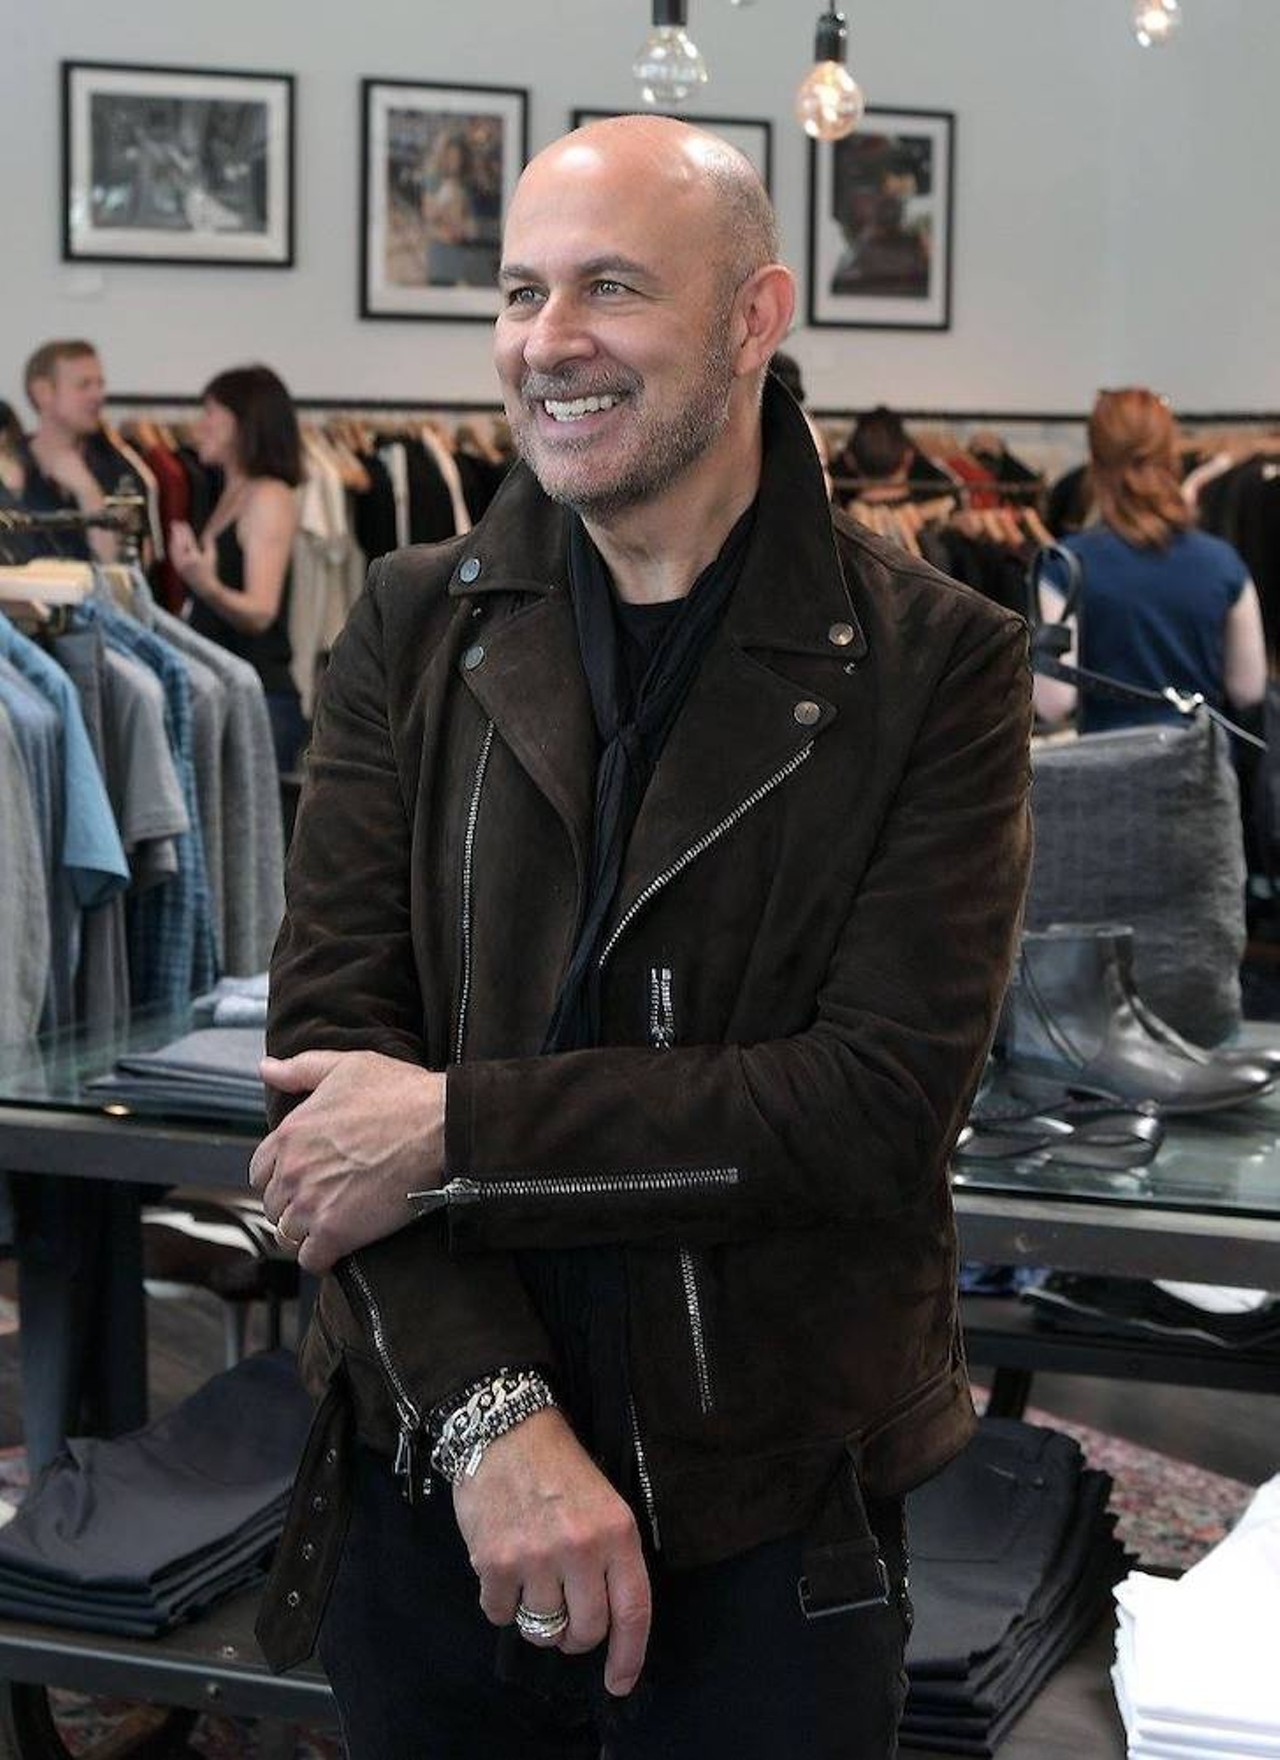 John Varvatos
johnvarvatos.com
A Detroit native who attended Eastern Michigan University and the University of Michigan, John varvatos first debuted his eponymous line in 2000. Before then, in the &#146;80s, he served as the head of menswear design at Polo Ralph Lauren, where he created Polo Jeans Co.; then, in the &#146;90s, Varvatos served as the head of menswear design at Calvin Klein, where he created boxer briefs. Varvatos draws inspiration for his fashion from rock &#146;n&#146; roll music and culture.
Photo via John Varvatos/Facebook